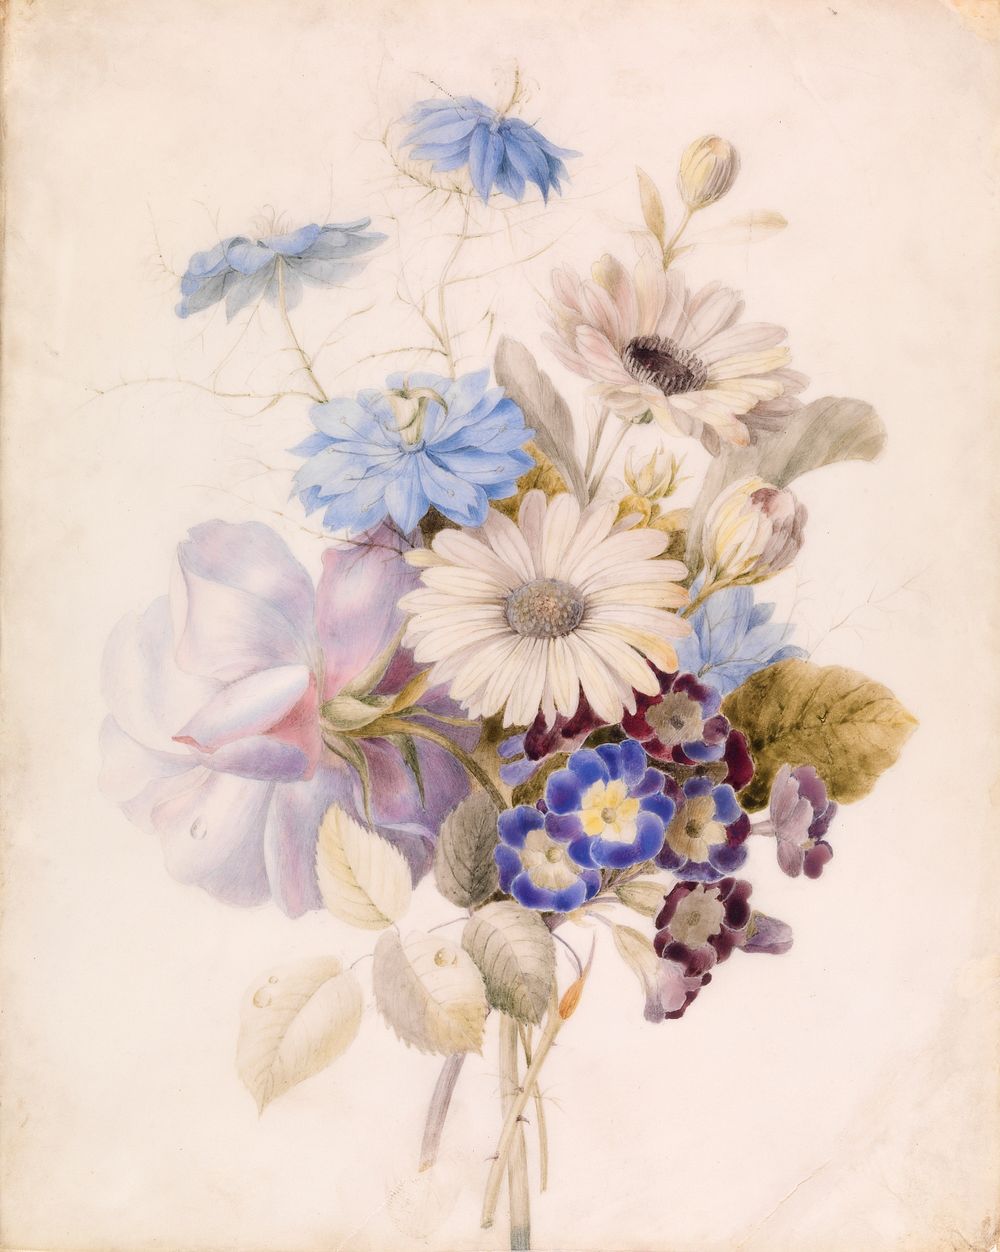 Flowers with Daisies by Unidentified artist